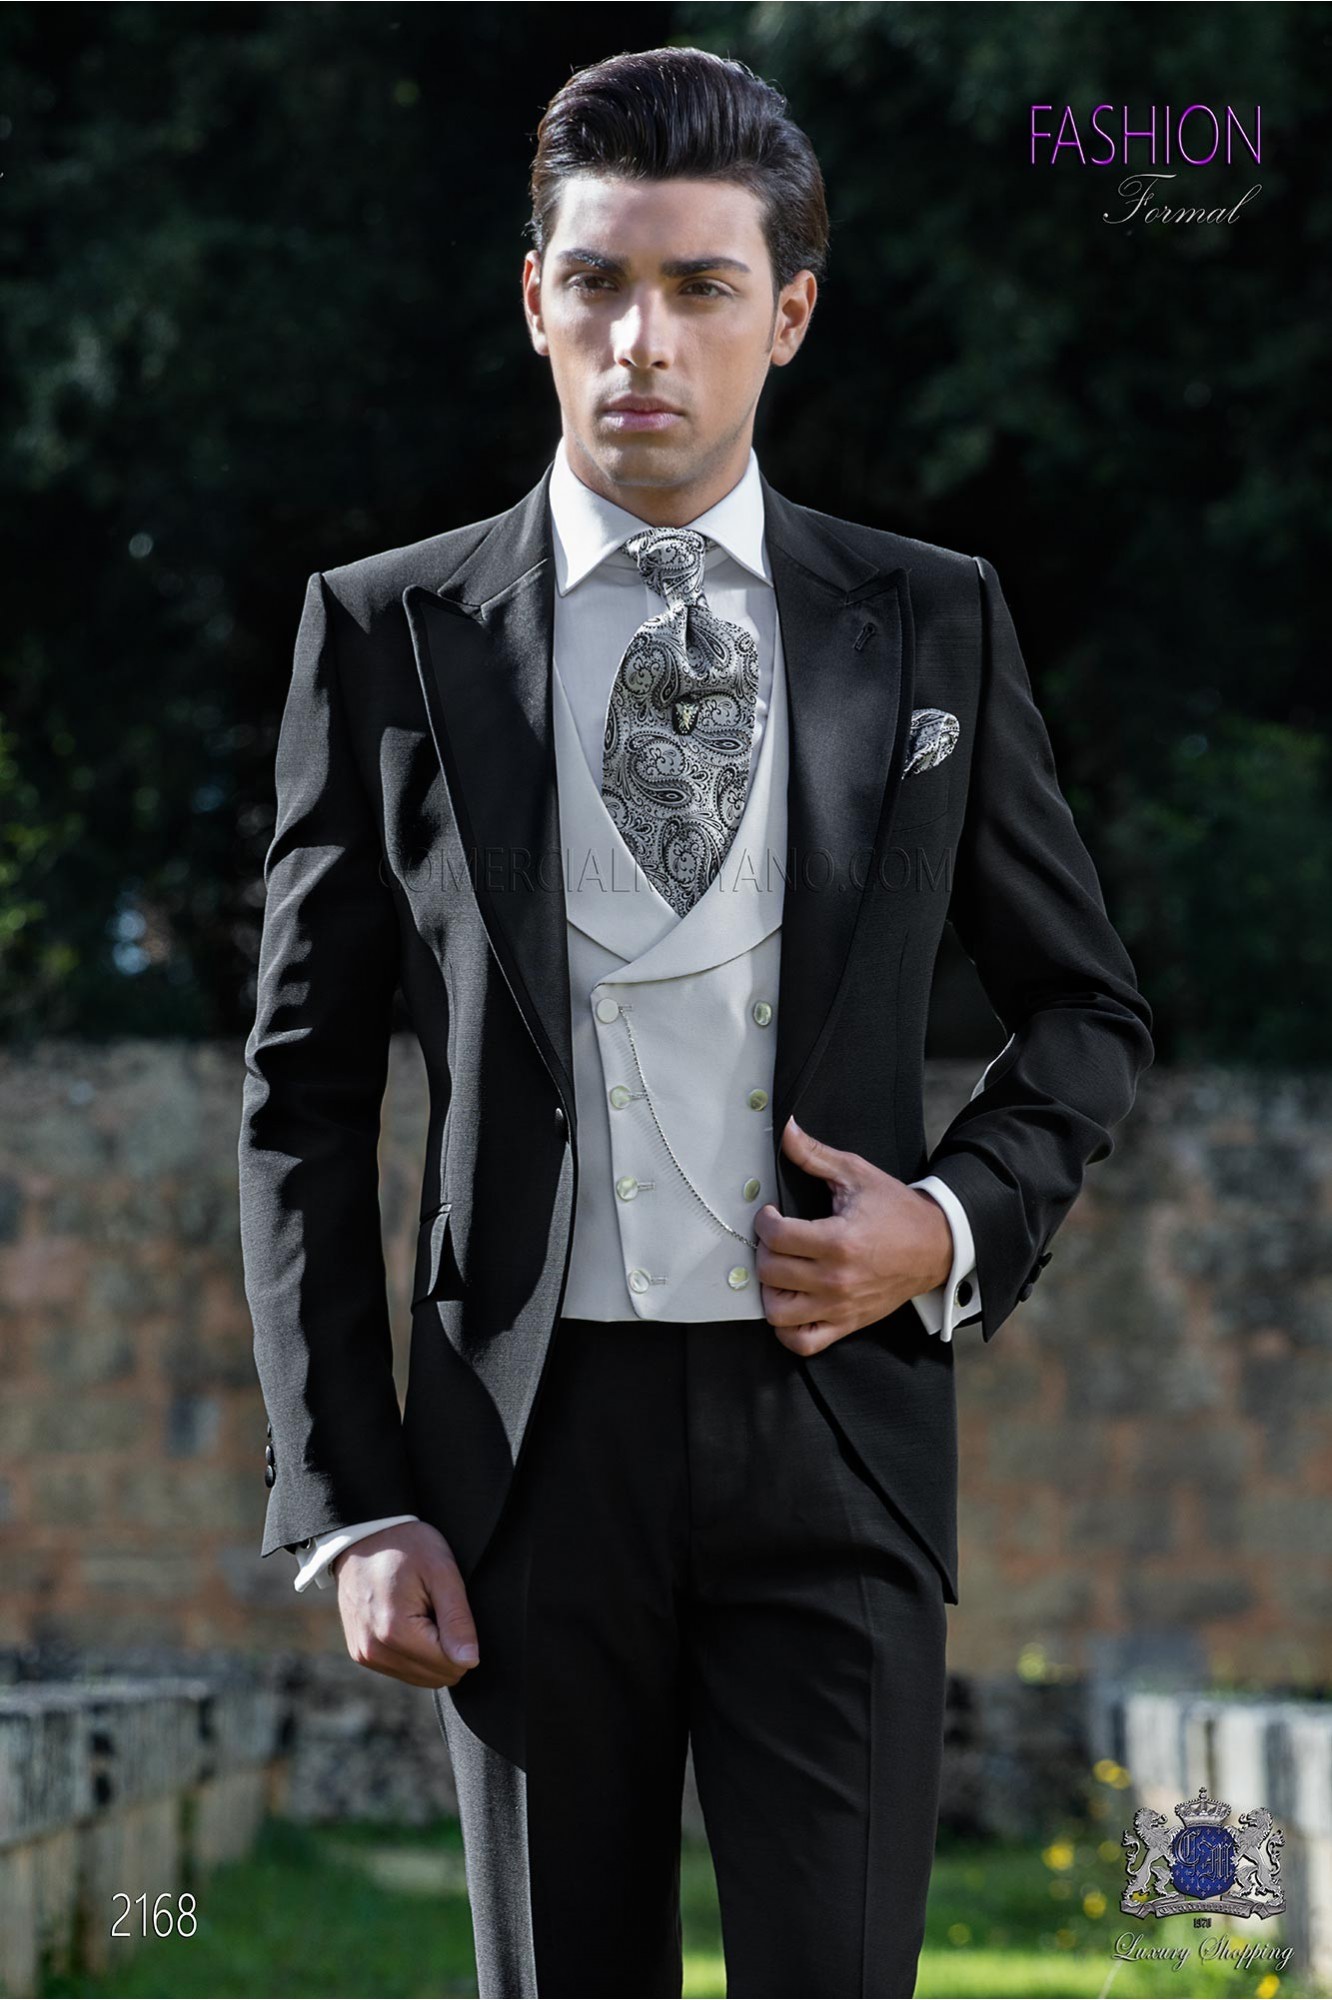 Italian wedding suit Slim stylish cut. Peak lapel with contrast fabric piping. Made from wool and acetate fabric in black